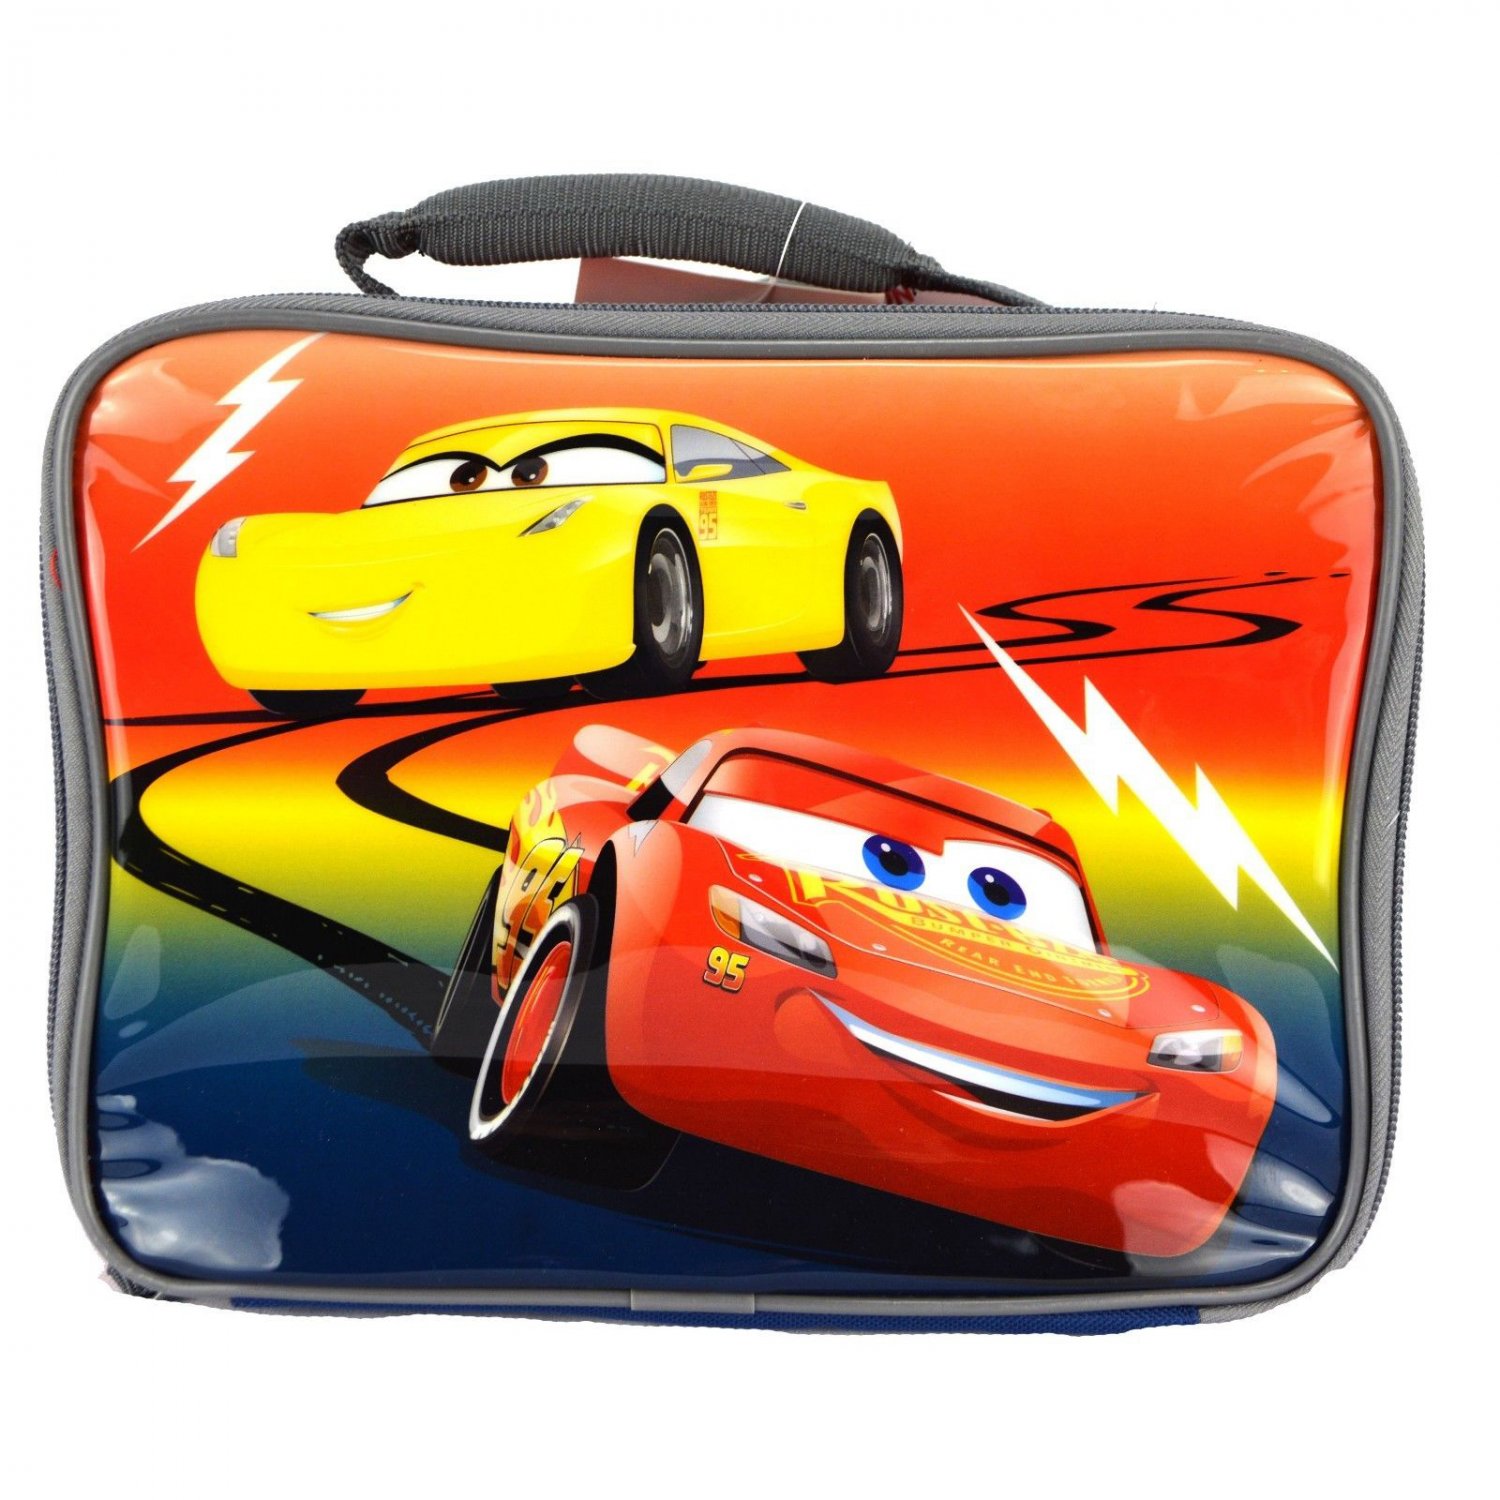 * NEW * American Tourister DisneyPixar Cars Lunch Tote (Blue/Red